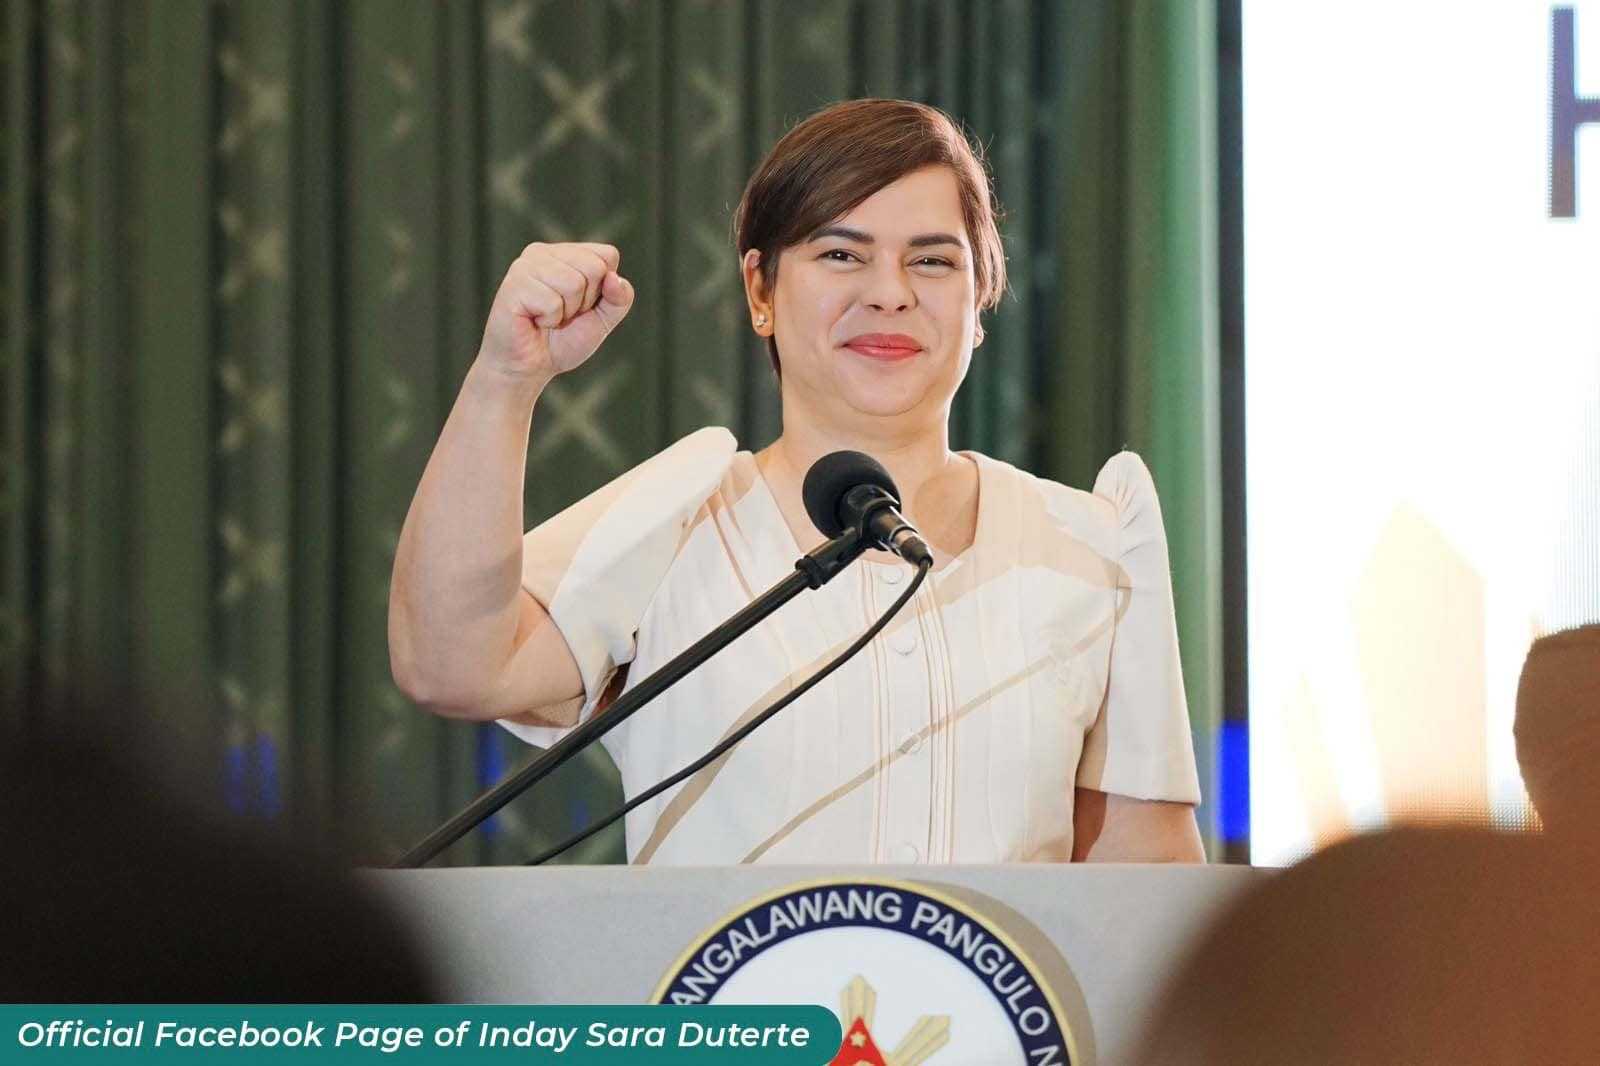 VP Sara welcomes 'opportunity to discuss legalities' of transferred ₱125 million confidential funds